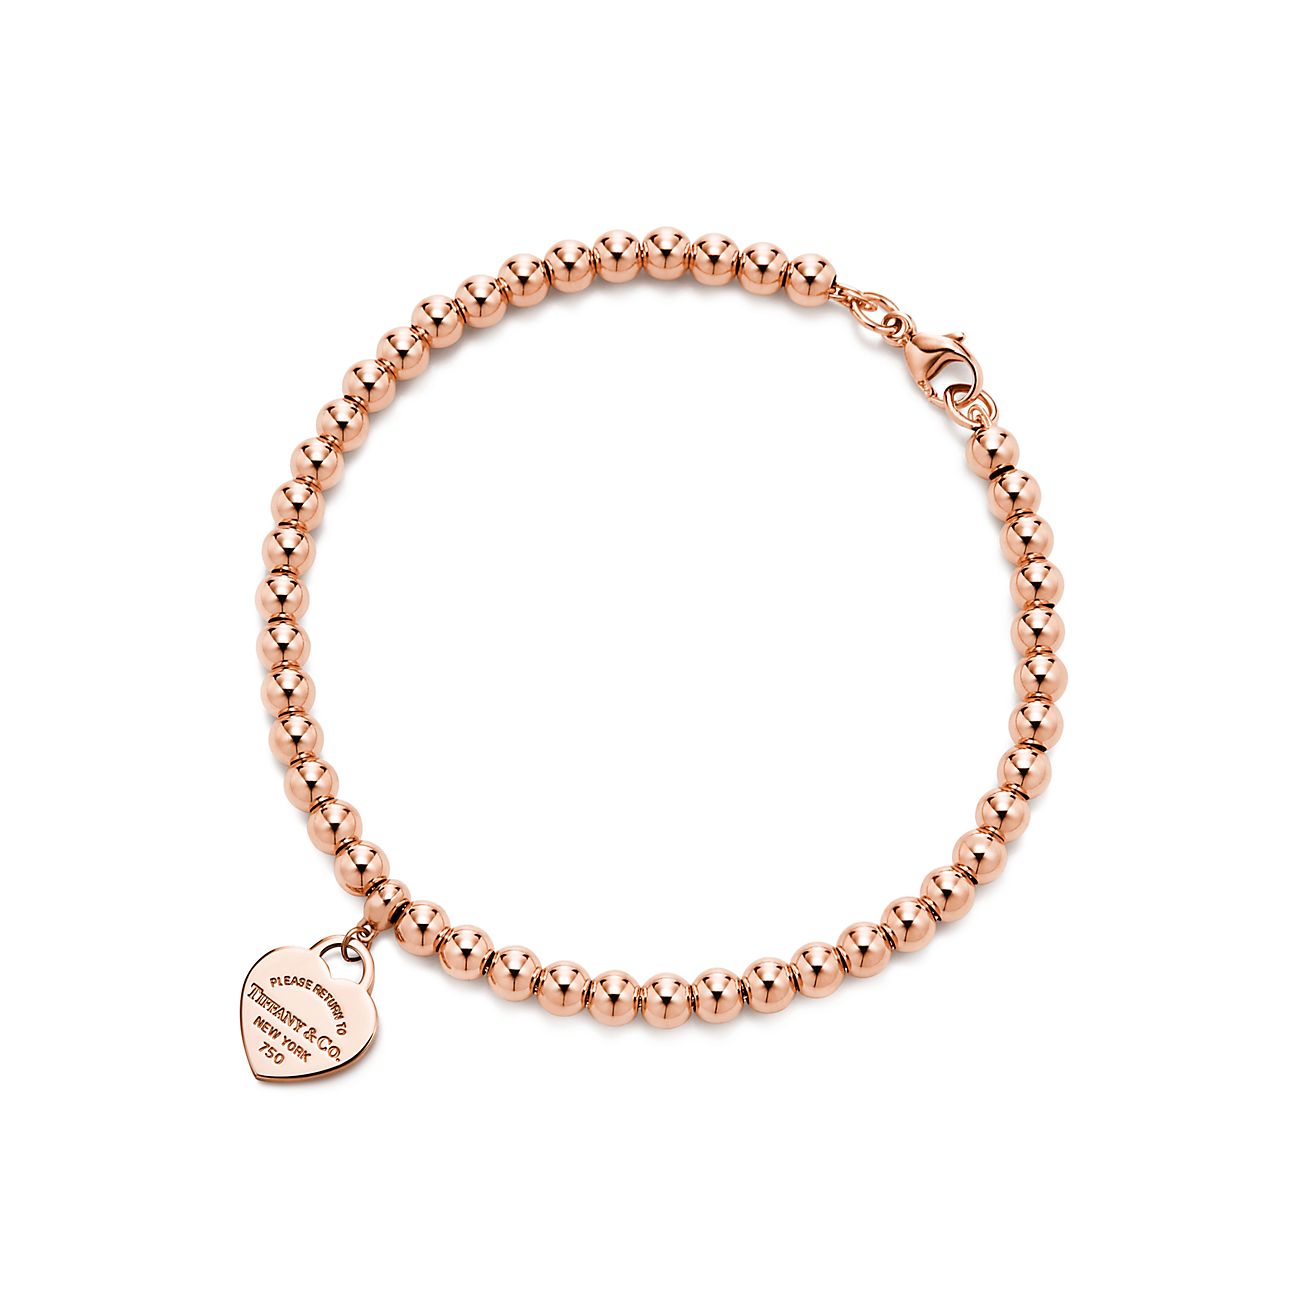 Return to Tiffany Heart Tag Bead Bracelet in Rose Gold, 4 mm, Size: Small